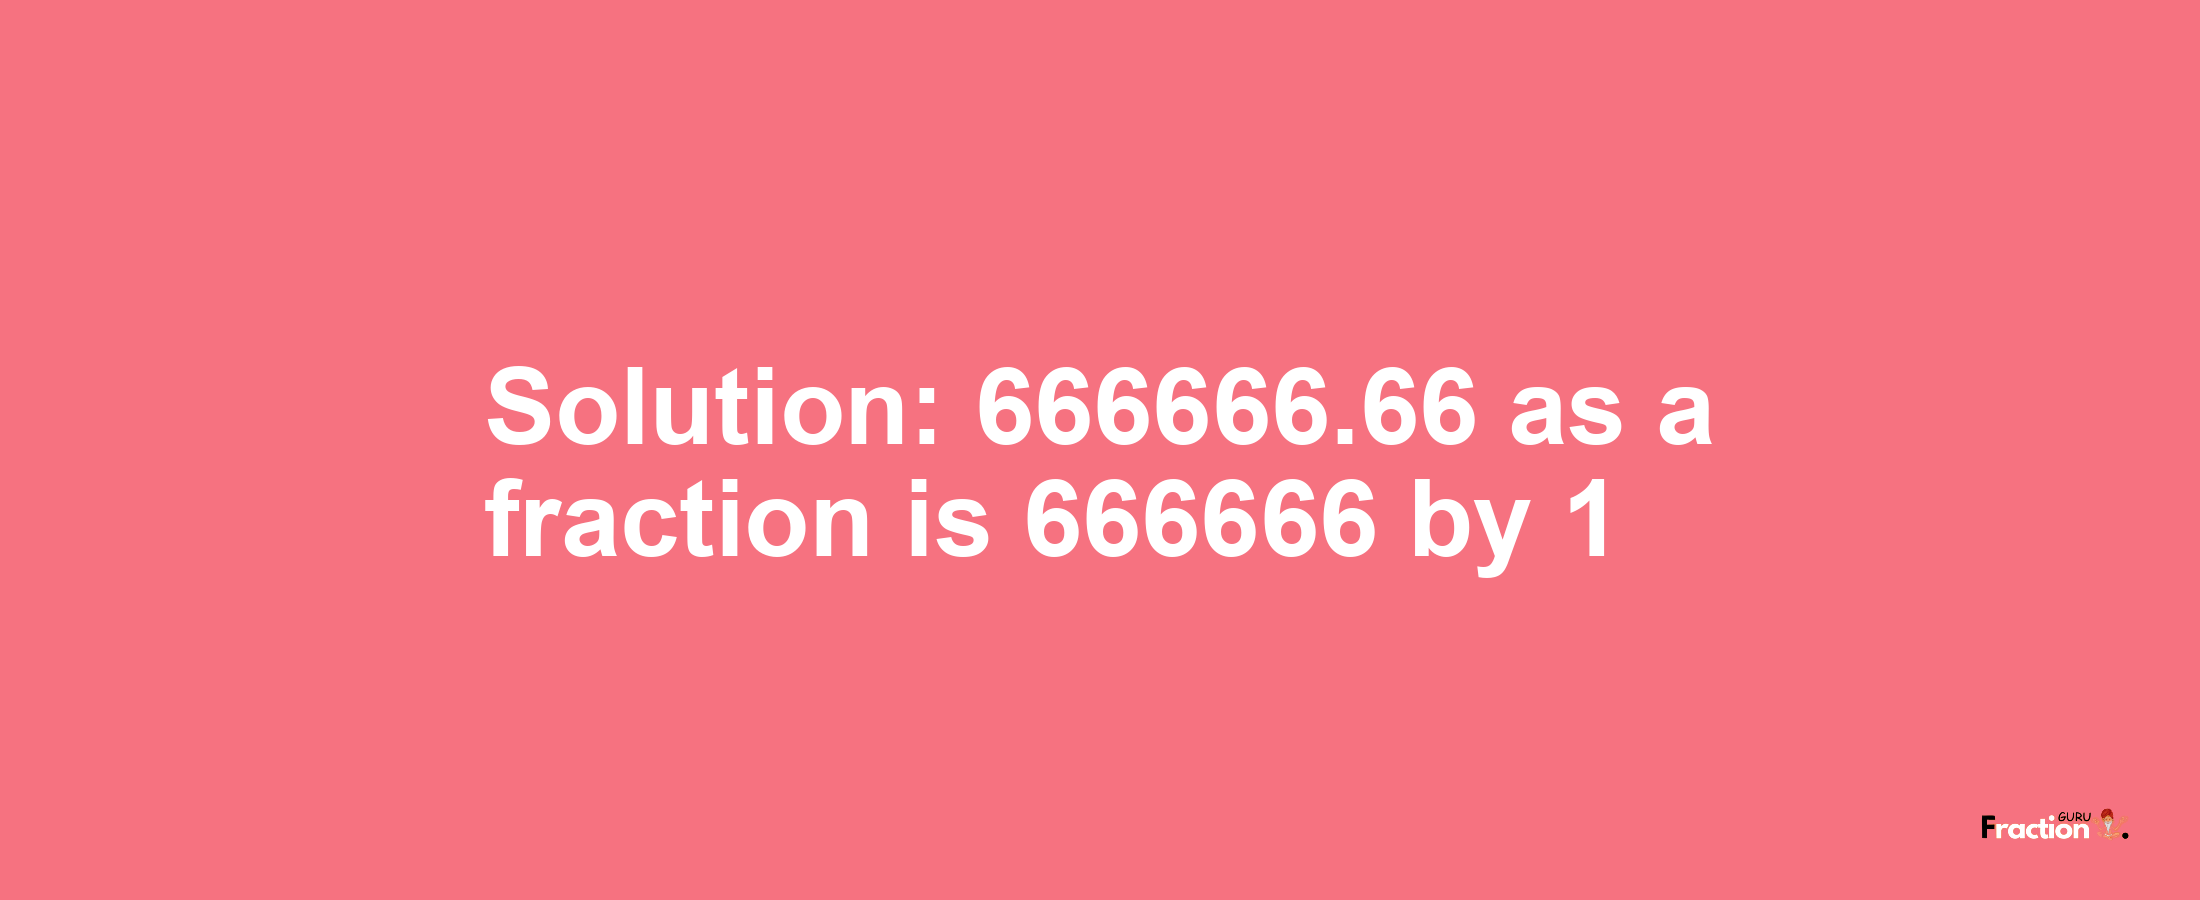 Solution:666666.66 as a fraction is 666666/1